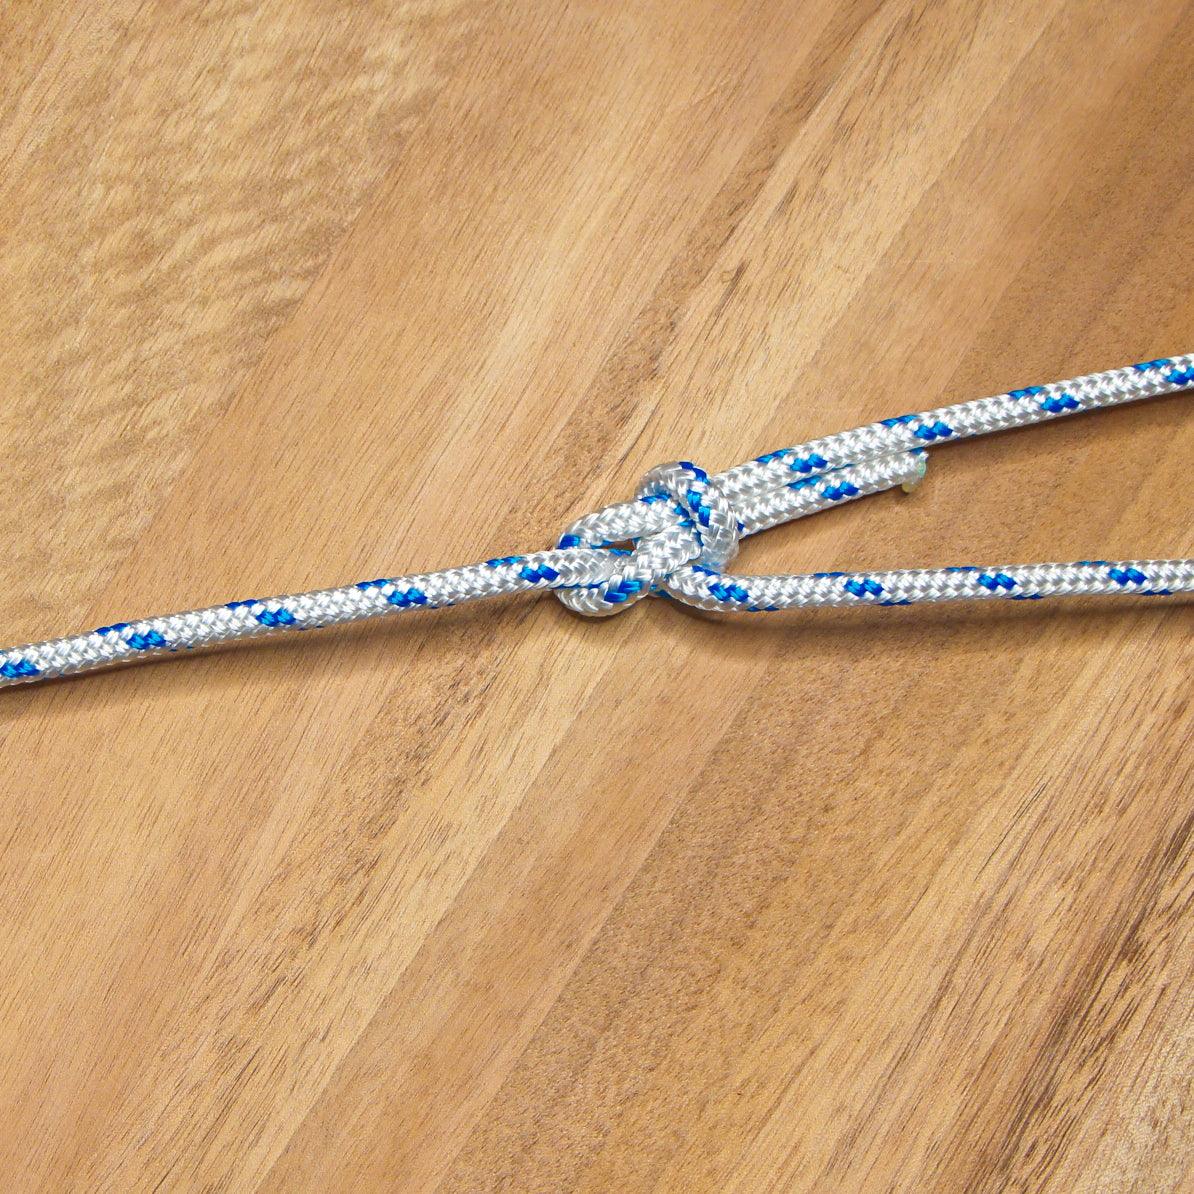 Marine Rope - White & Blue fleck - 8mm - Cams Cords